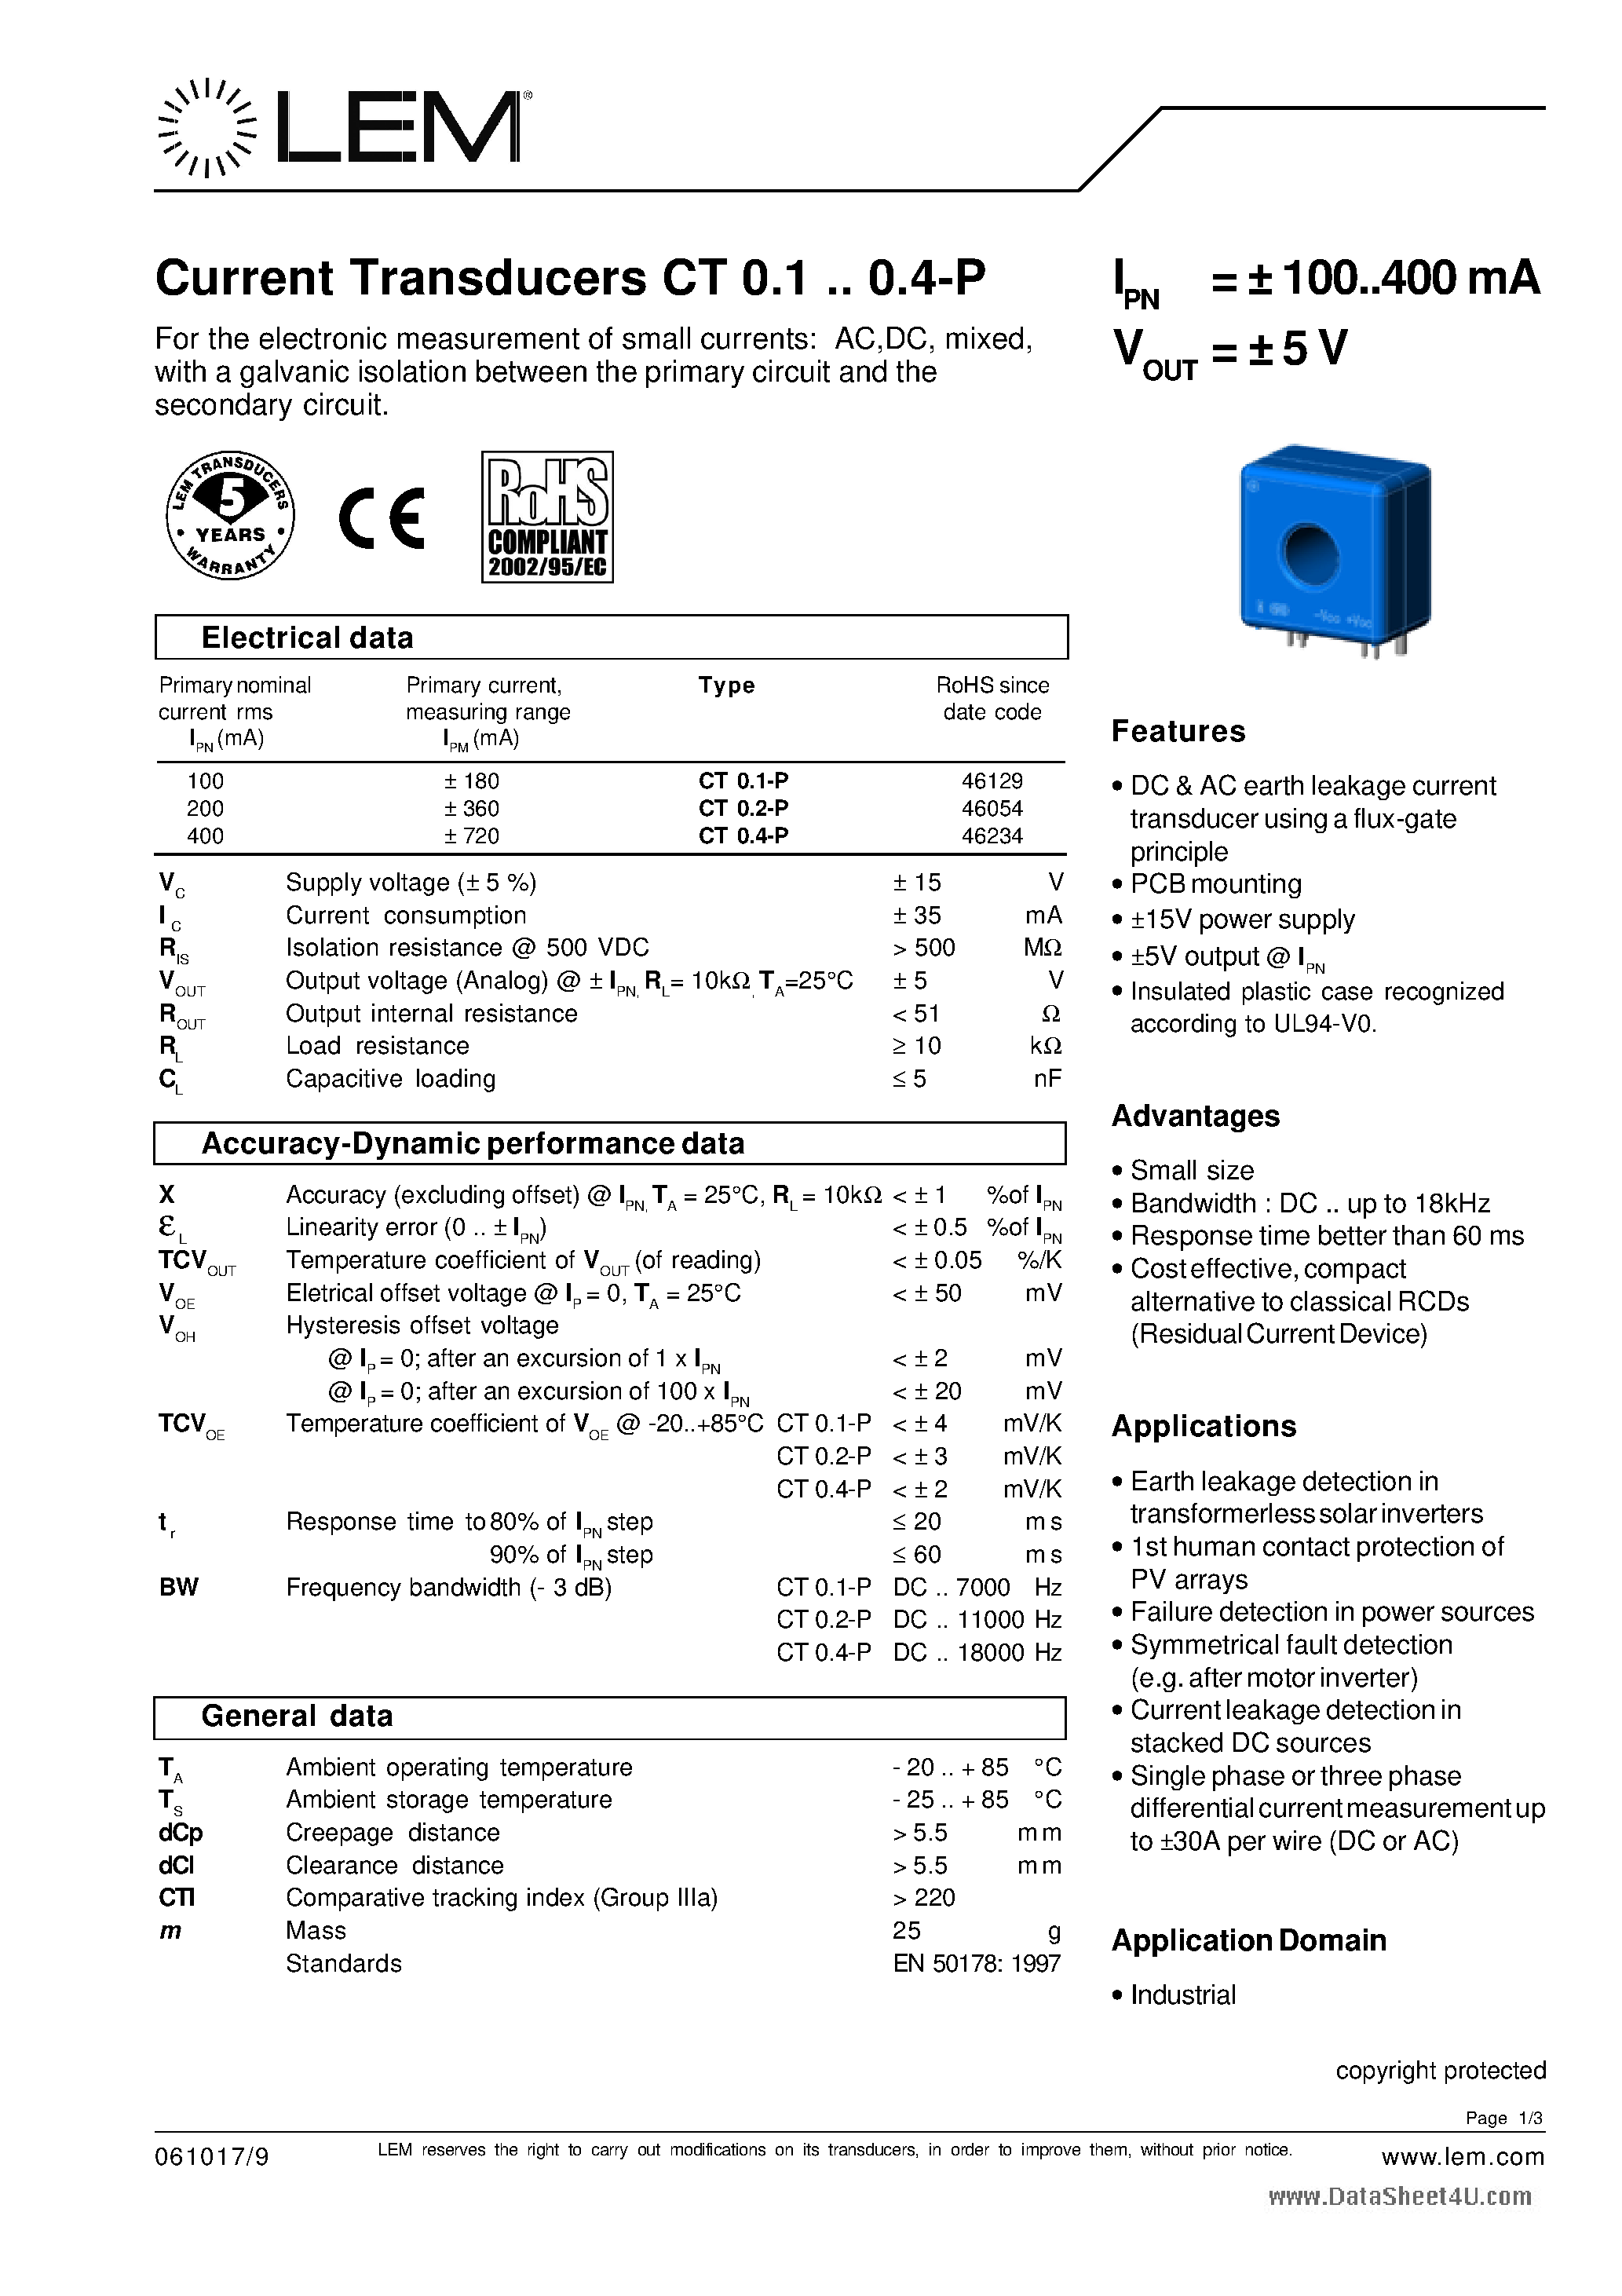 Datasheet CT0.1-P - (CT0.1-P - CT0.4-P) Current Transducers page 1